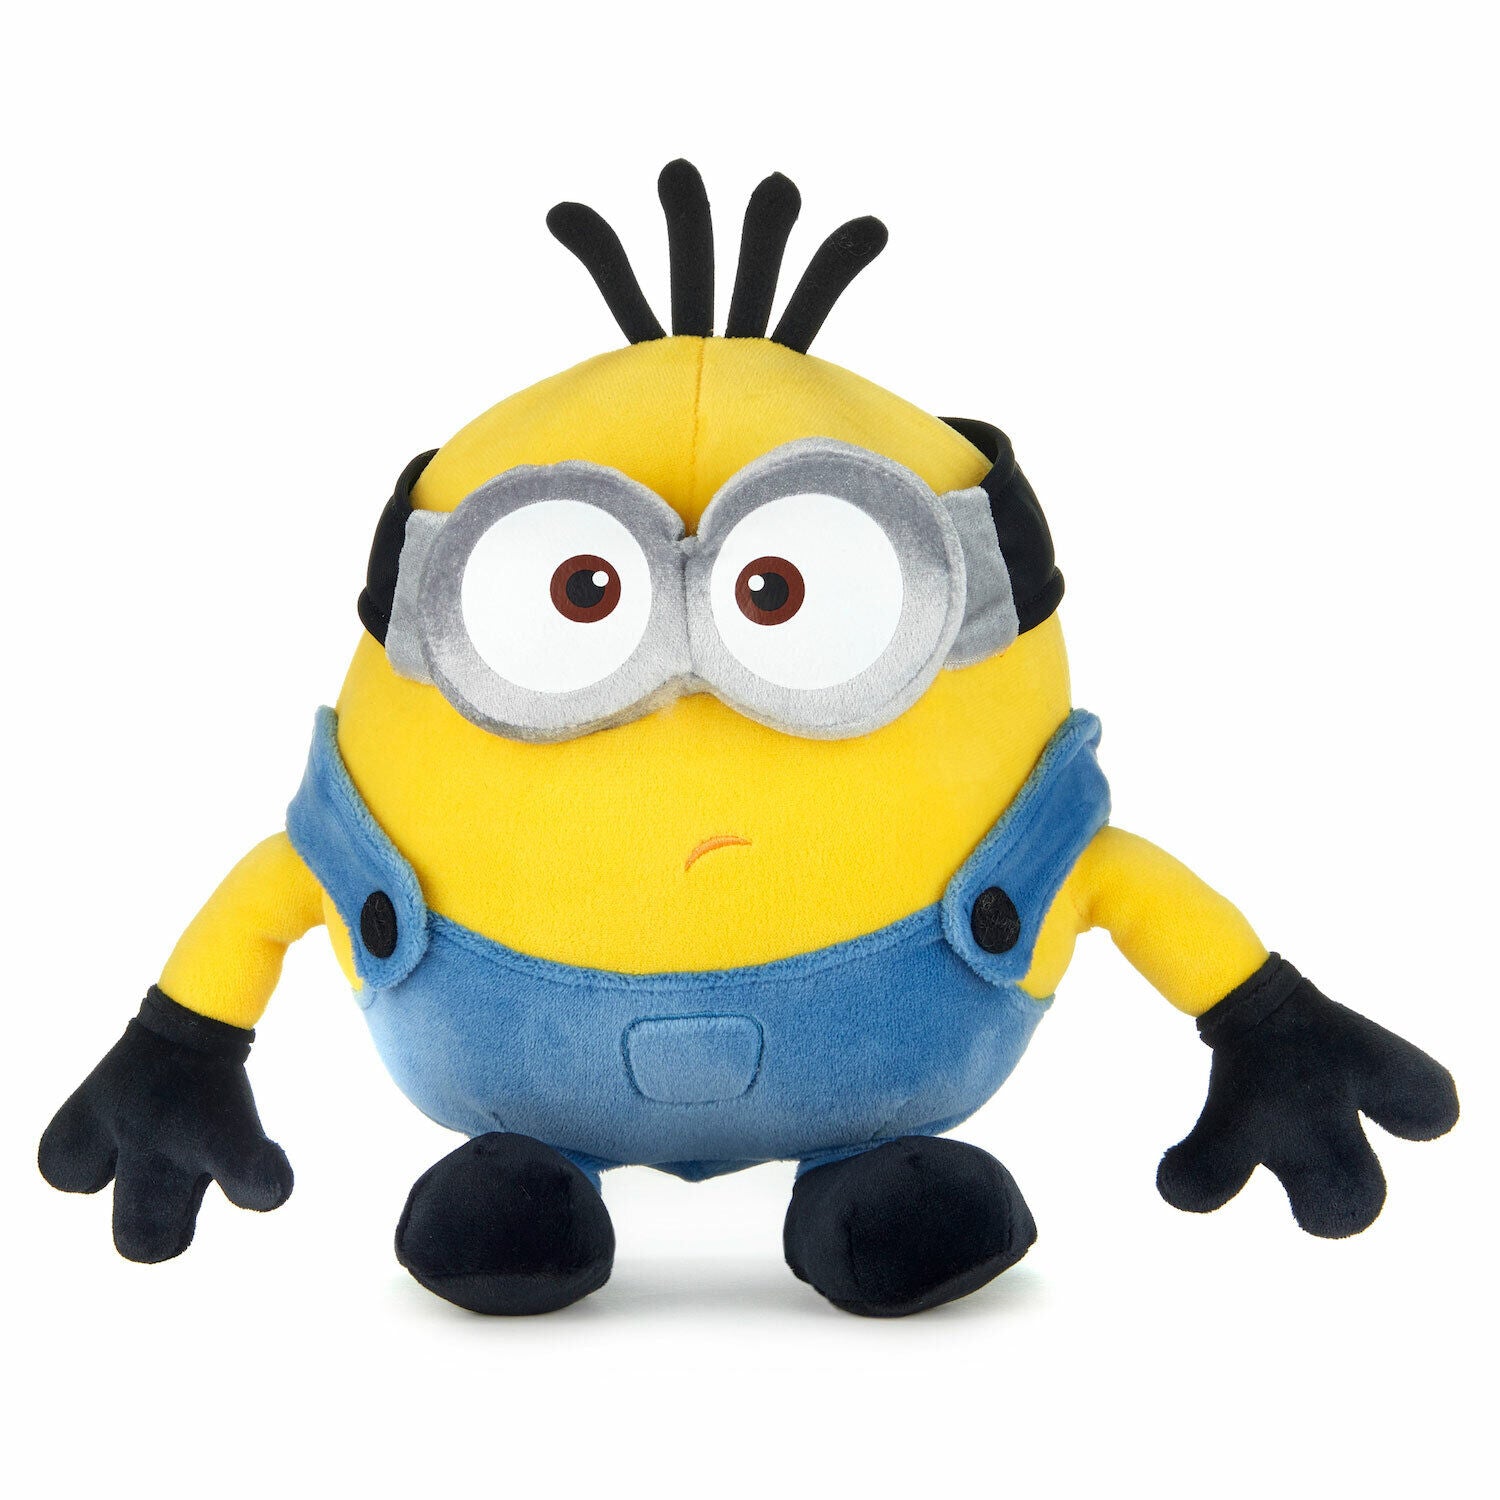 New Minions The Rise of Gru 10-Inch Cuddly Otto Plush Toy